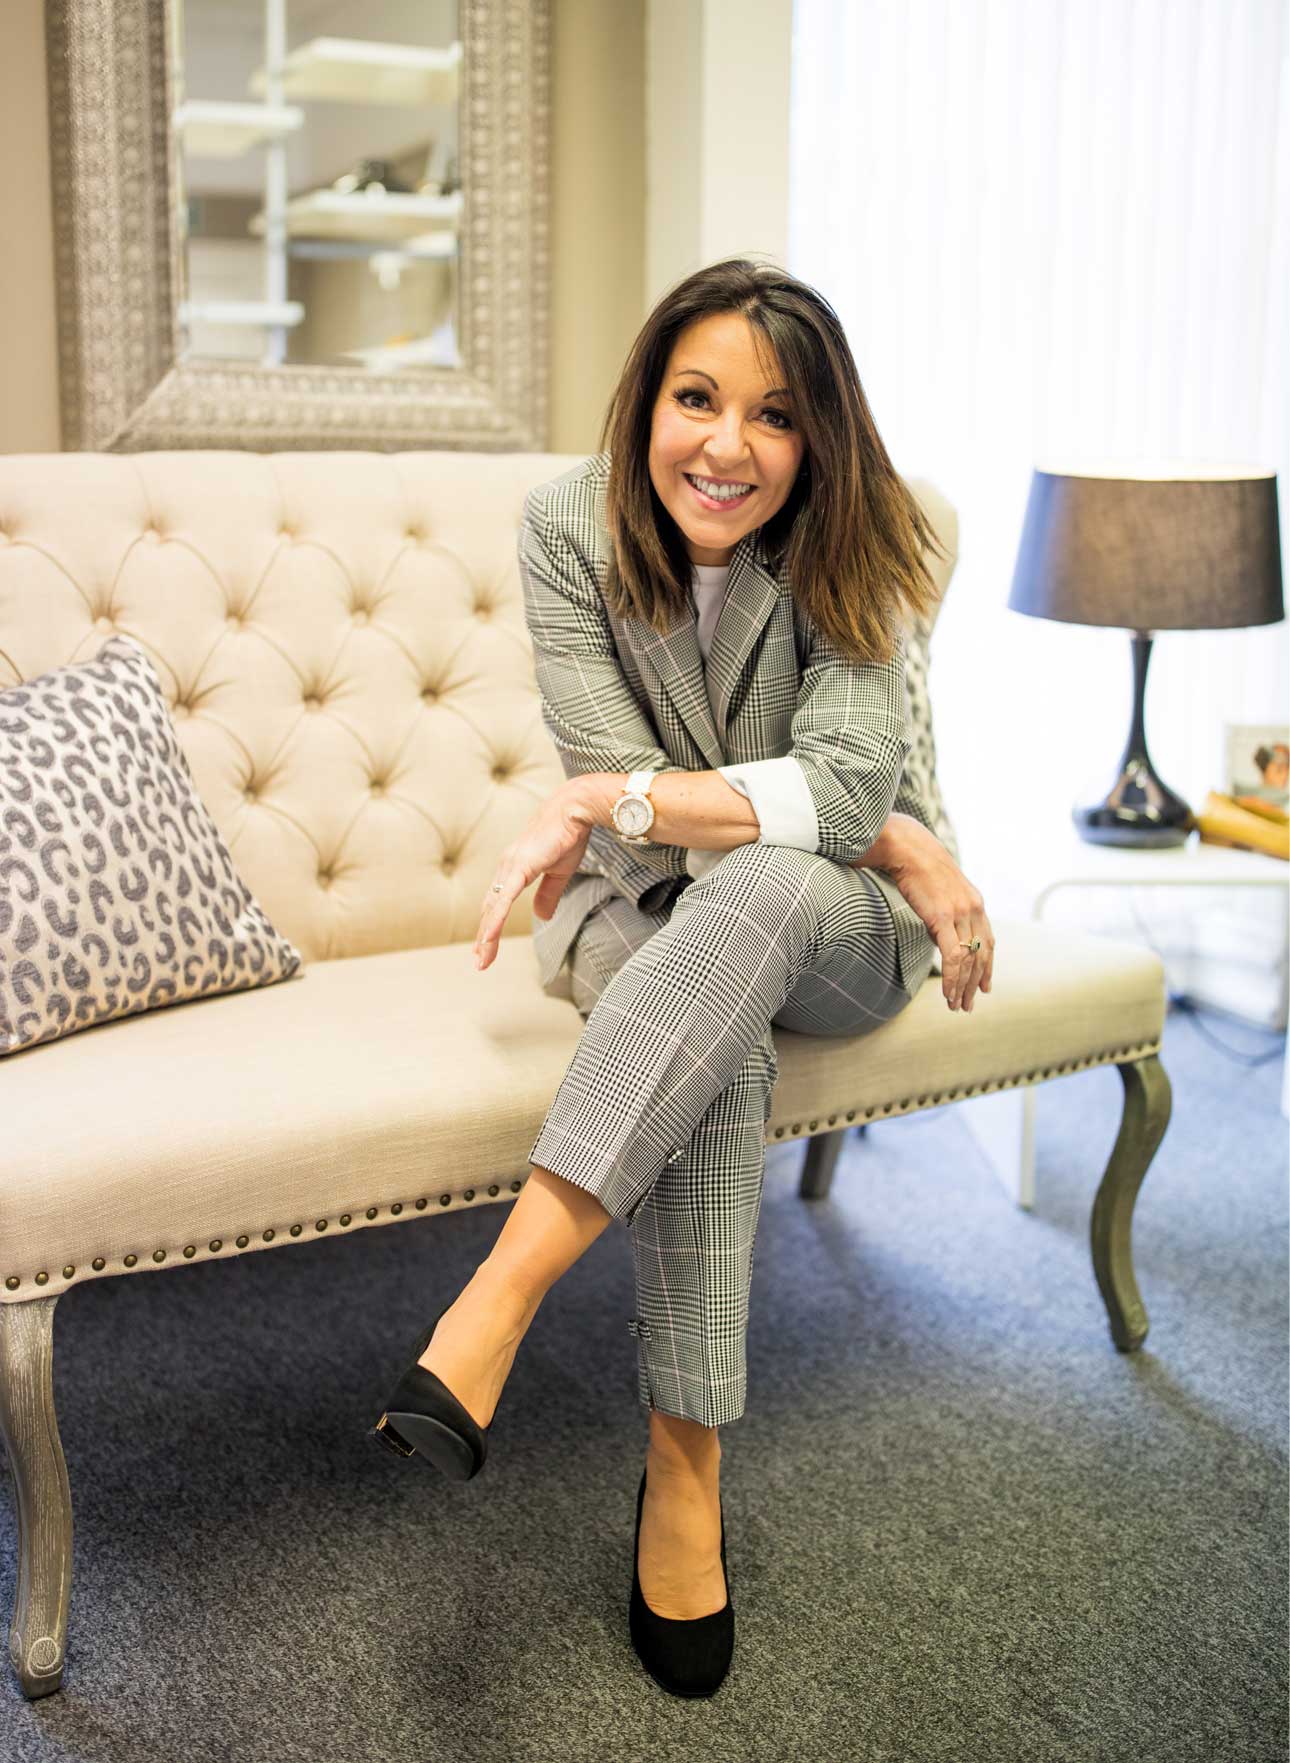 Tracey Redmond in the Style Coaching Institute sitting - wearing a check suit